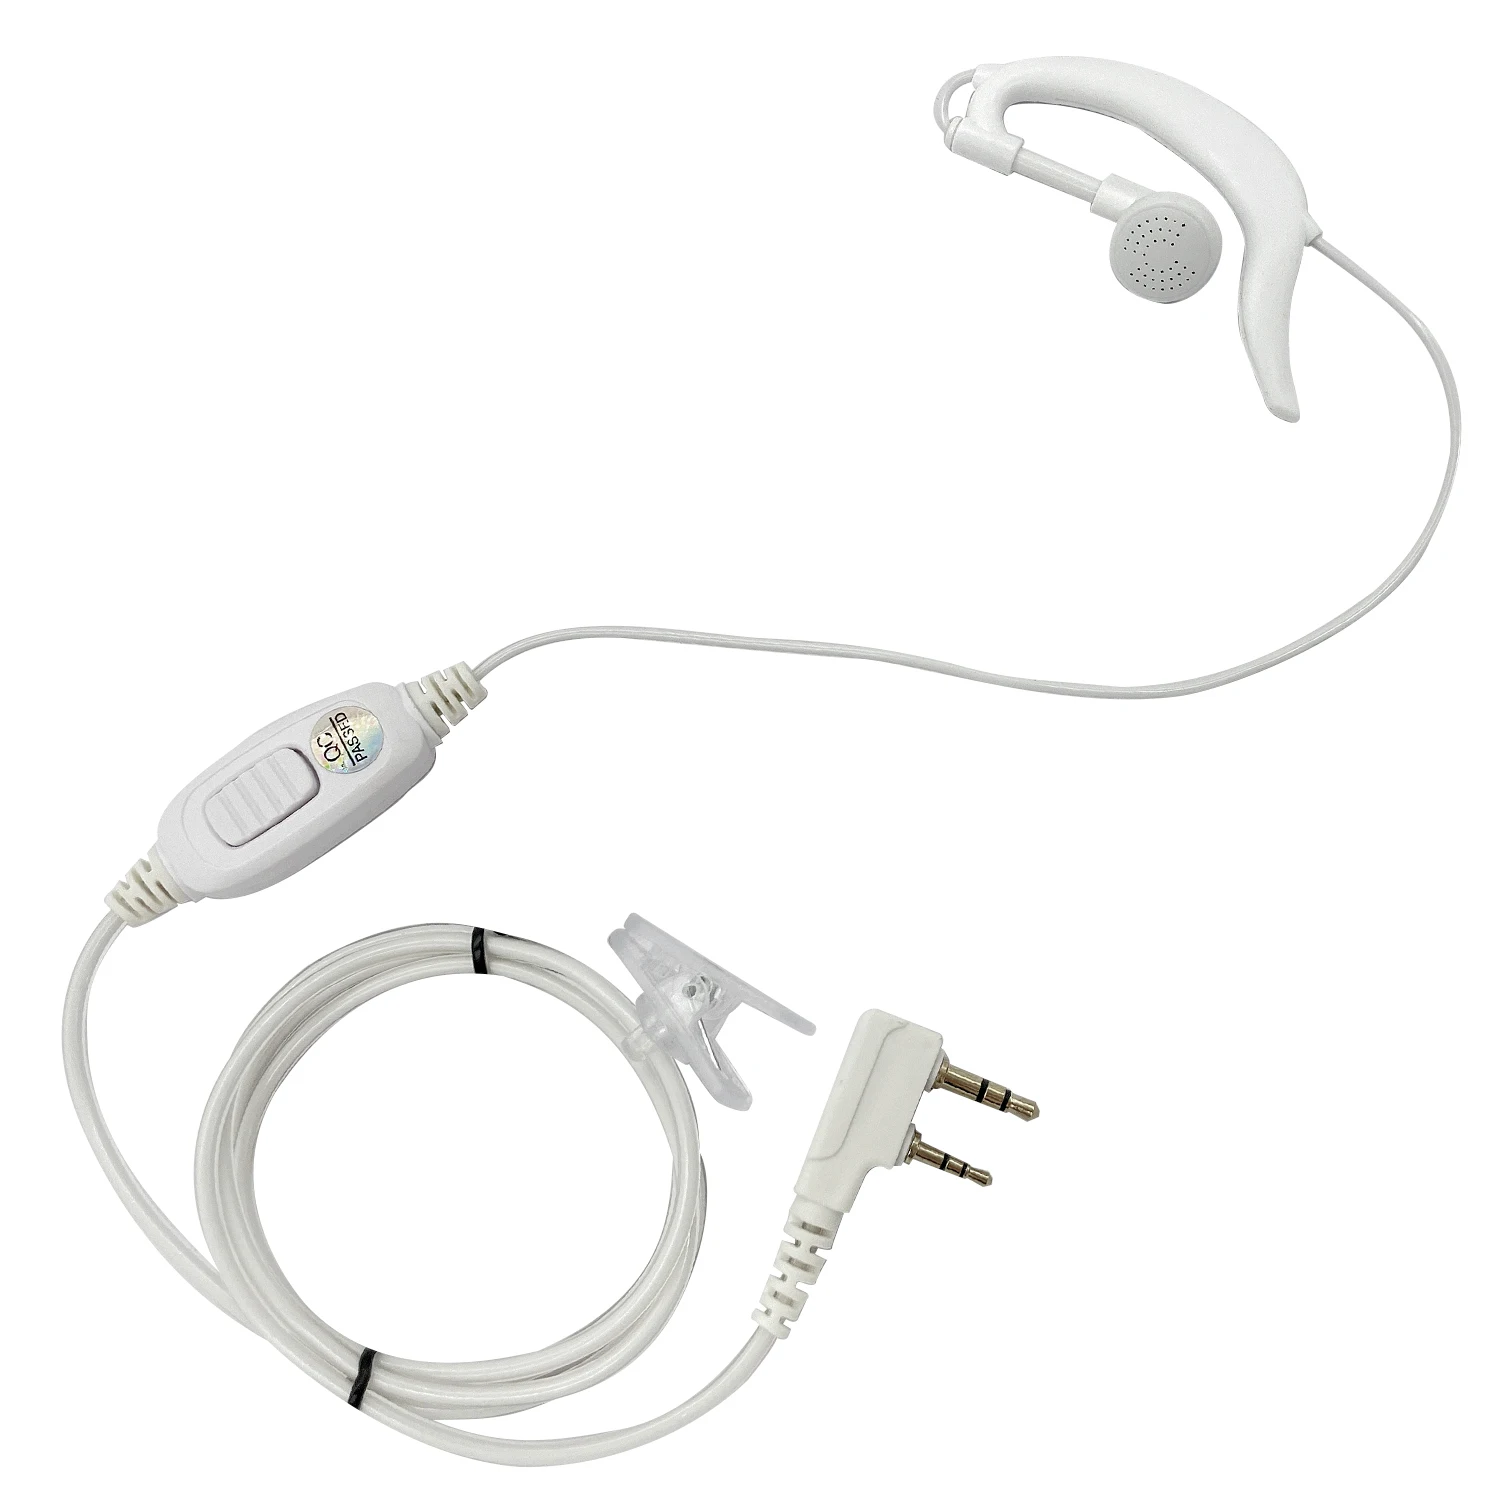 White G type earphone intercom earphone Oval PTT is suitable for use baofeng BF-F9, BF-F9 V2+, RD-5R  two way radios